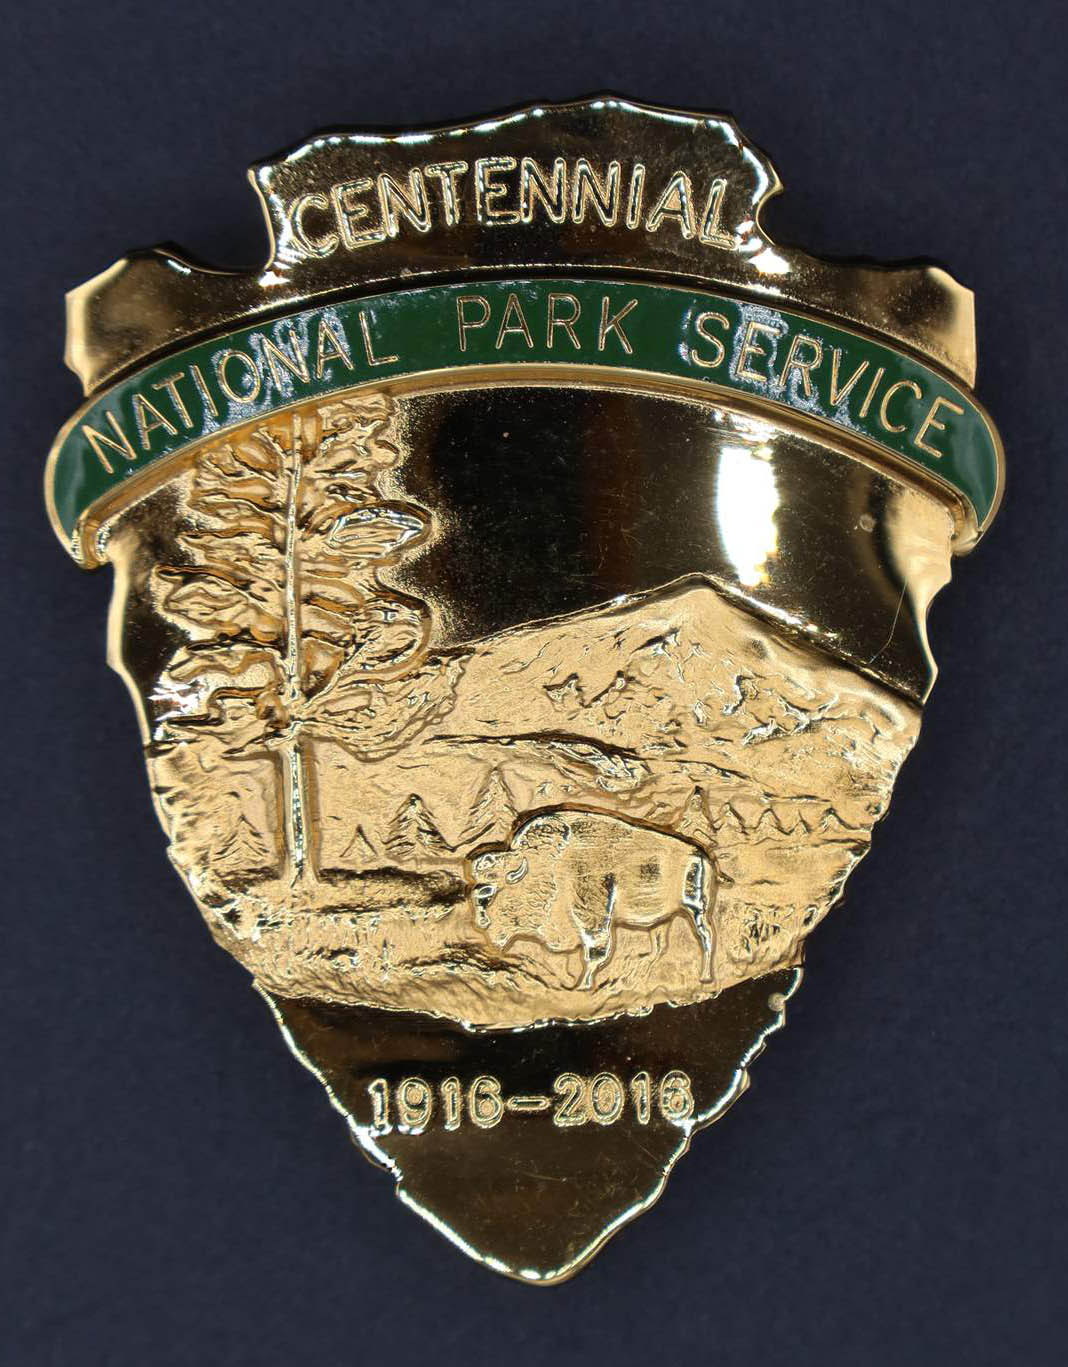 Gold arrowhead-shaped badge featuring bison scene engraved with Centennial at top and 1916-2016 below. Green banner reads National Park Service.